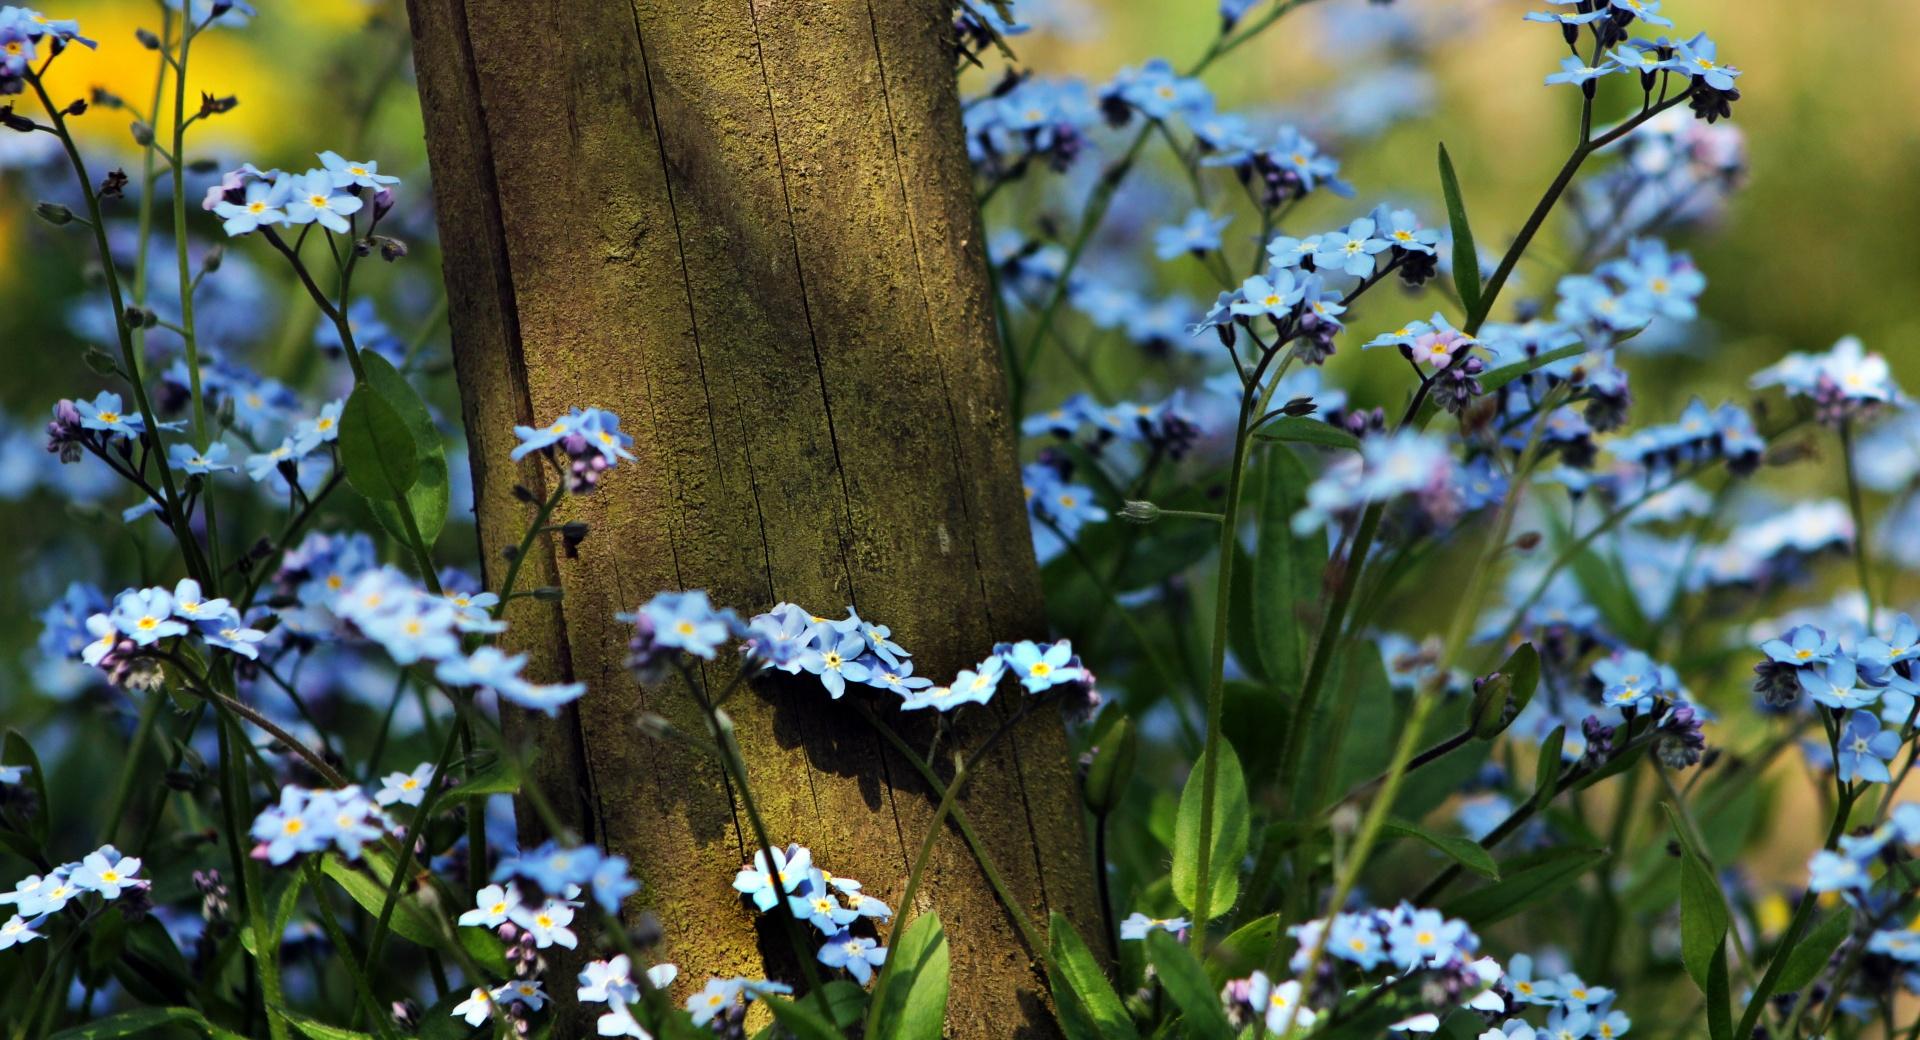 Forget Me Not Flowers Near A Wooden Pole wallpapers HD quality